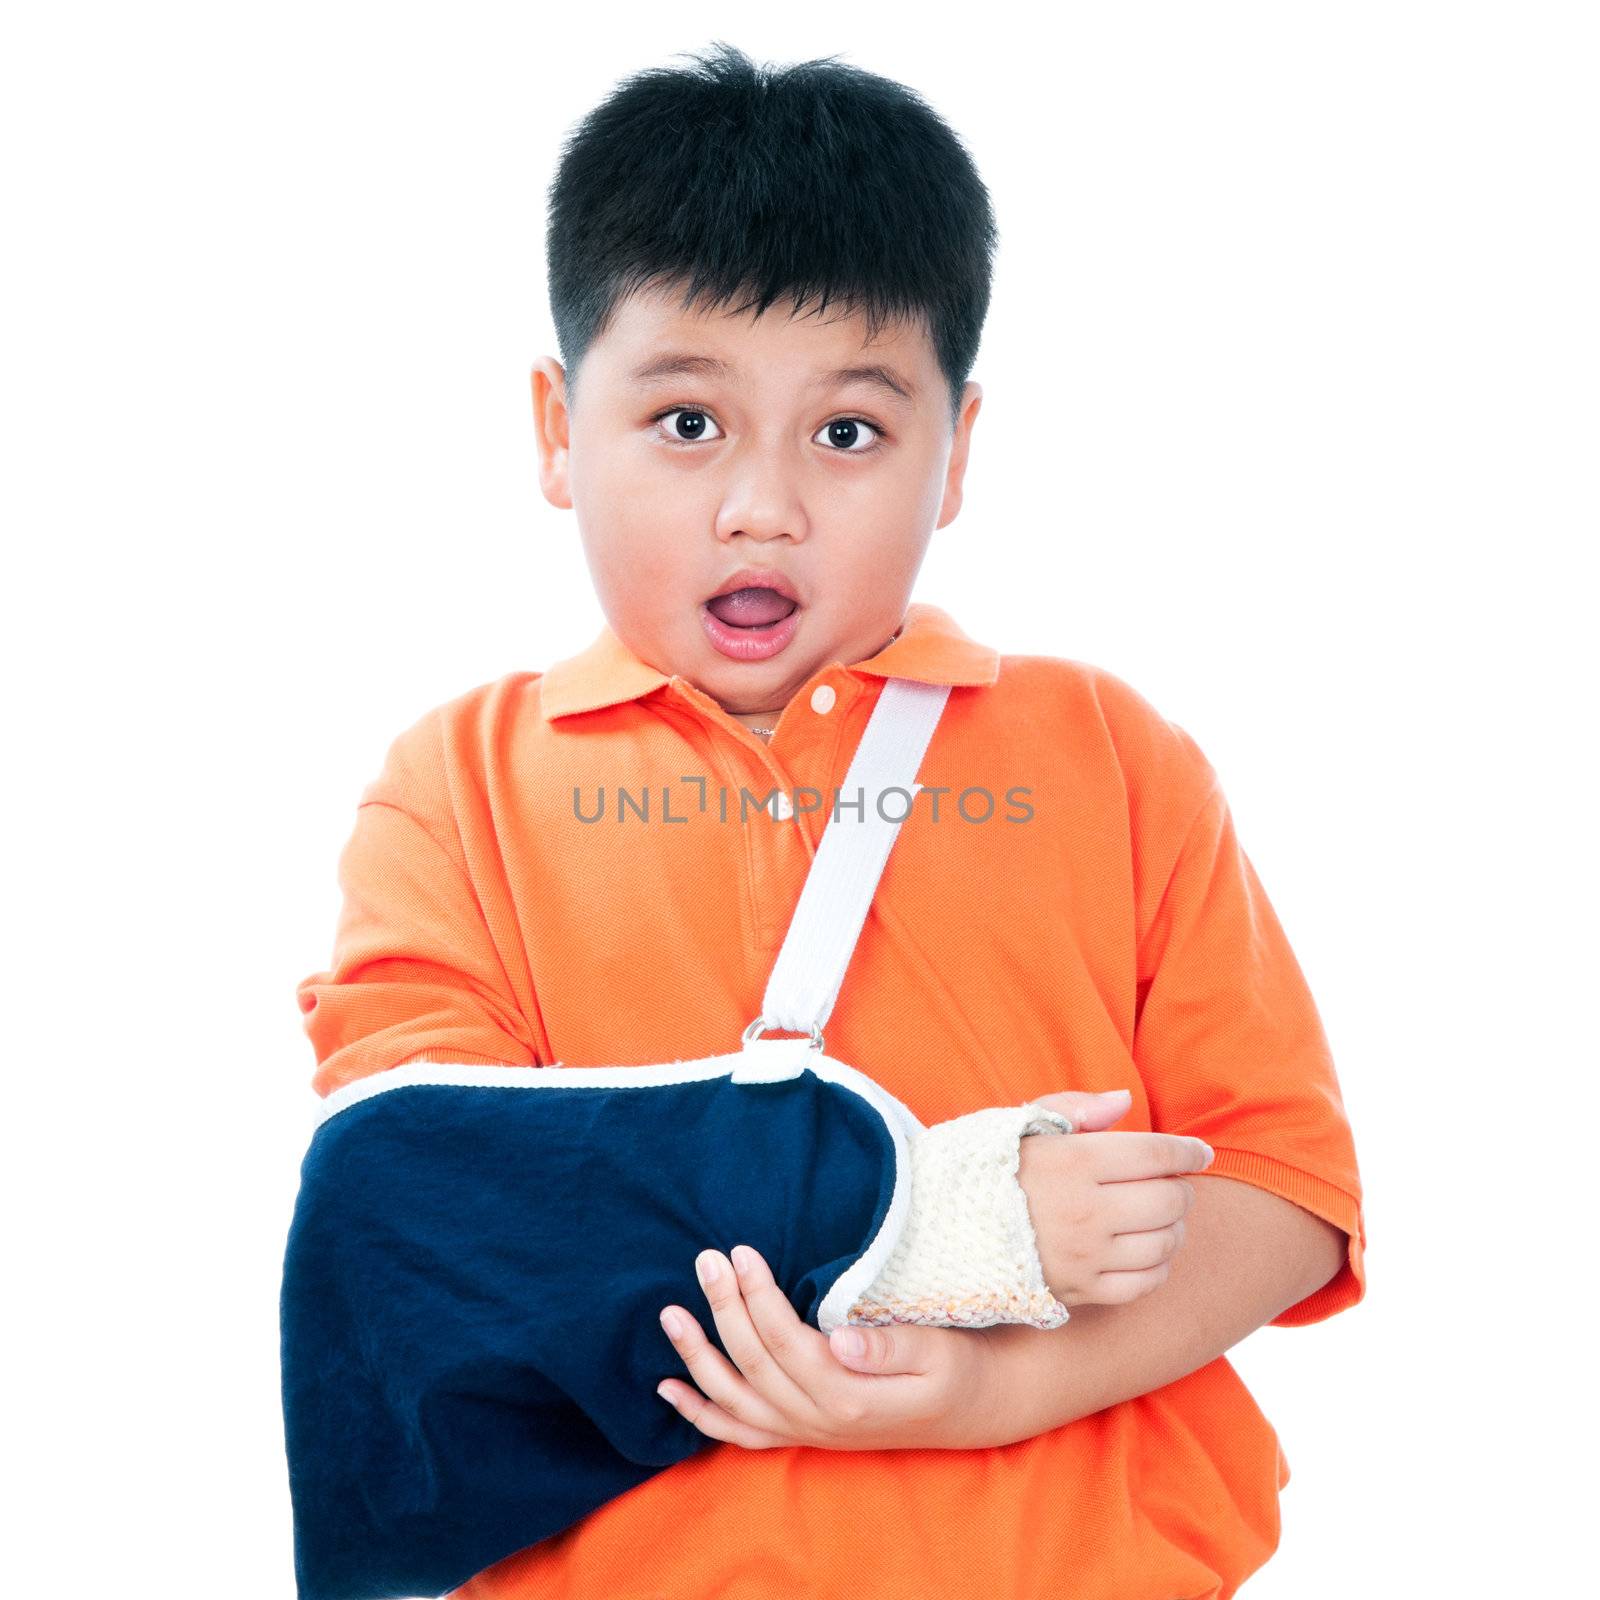 Portrait of a young Asian boy with fractured hand in plaster cast over white background.